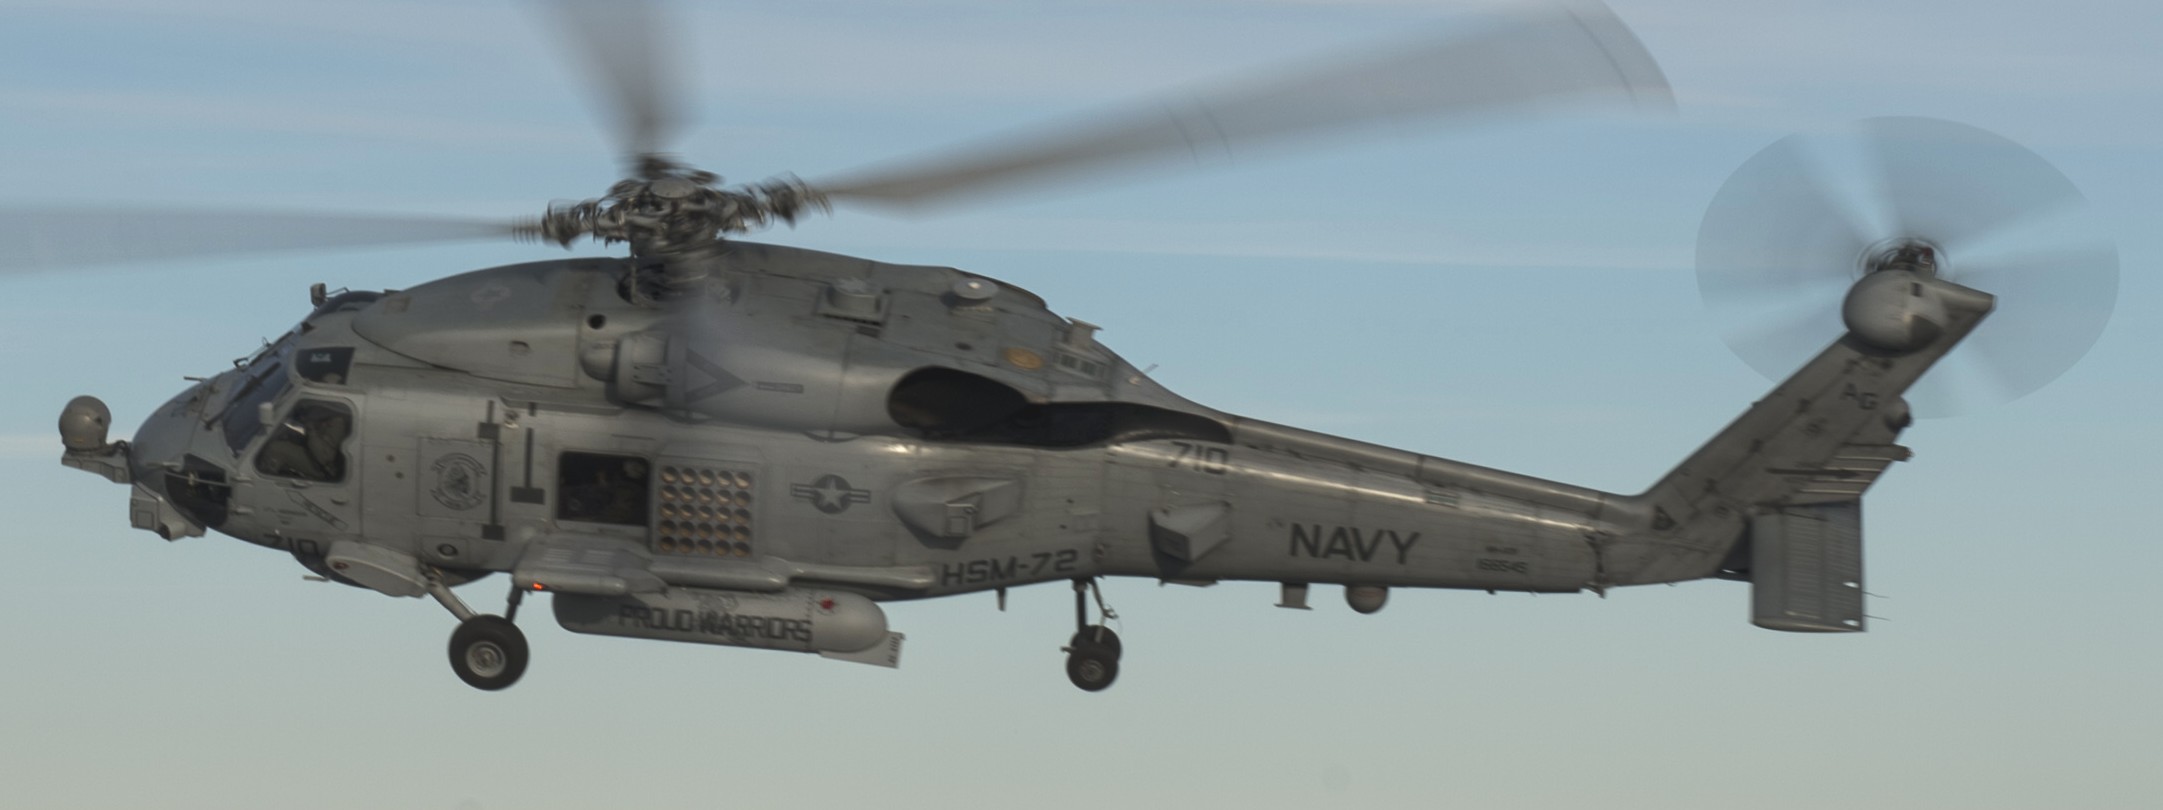 hsm-72 proud warriors helicopter maritime strike squadron mh-60r seahawk carrier air wing cvw-7 ddg-79 uss oscar austin 2014